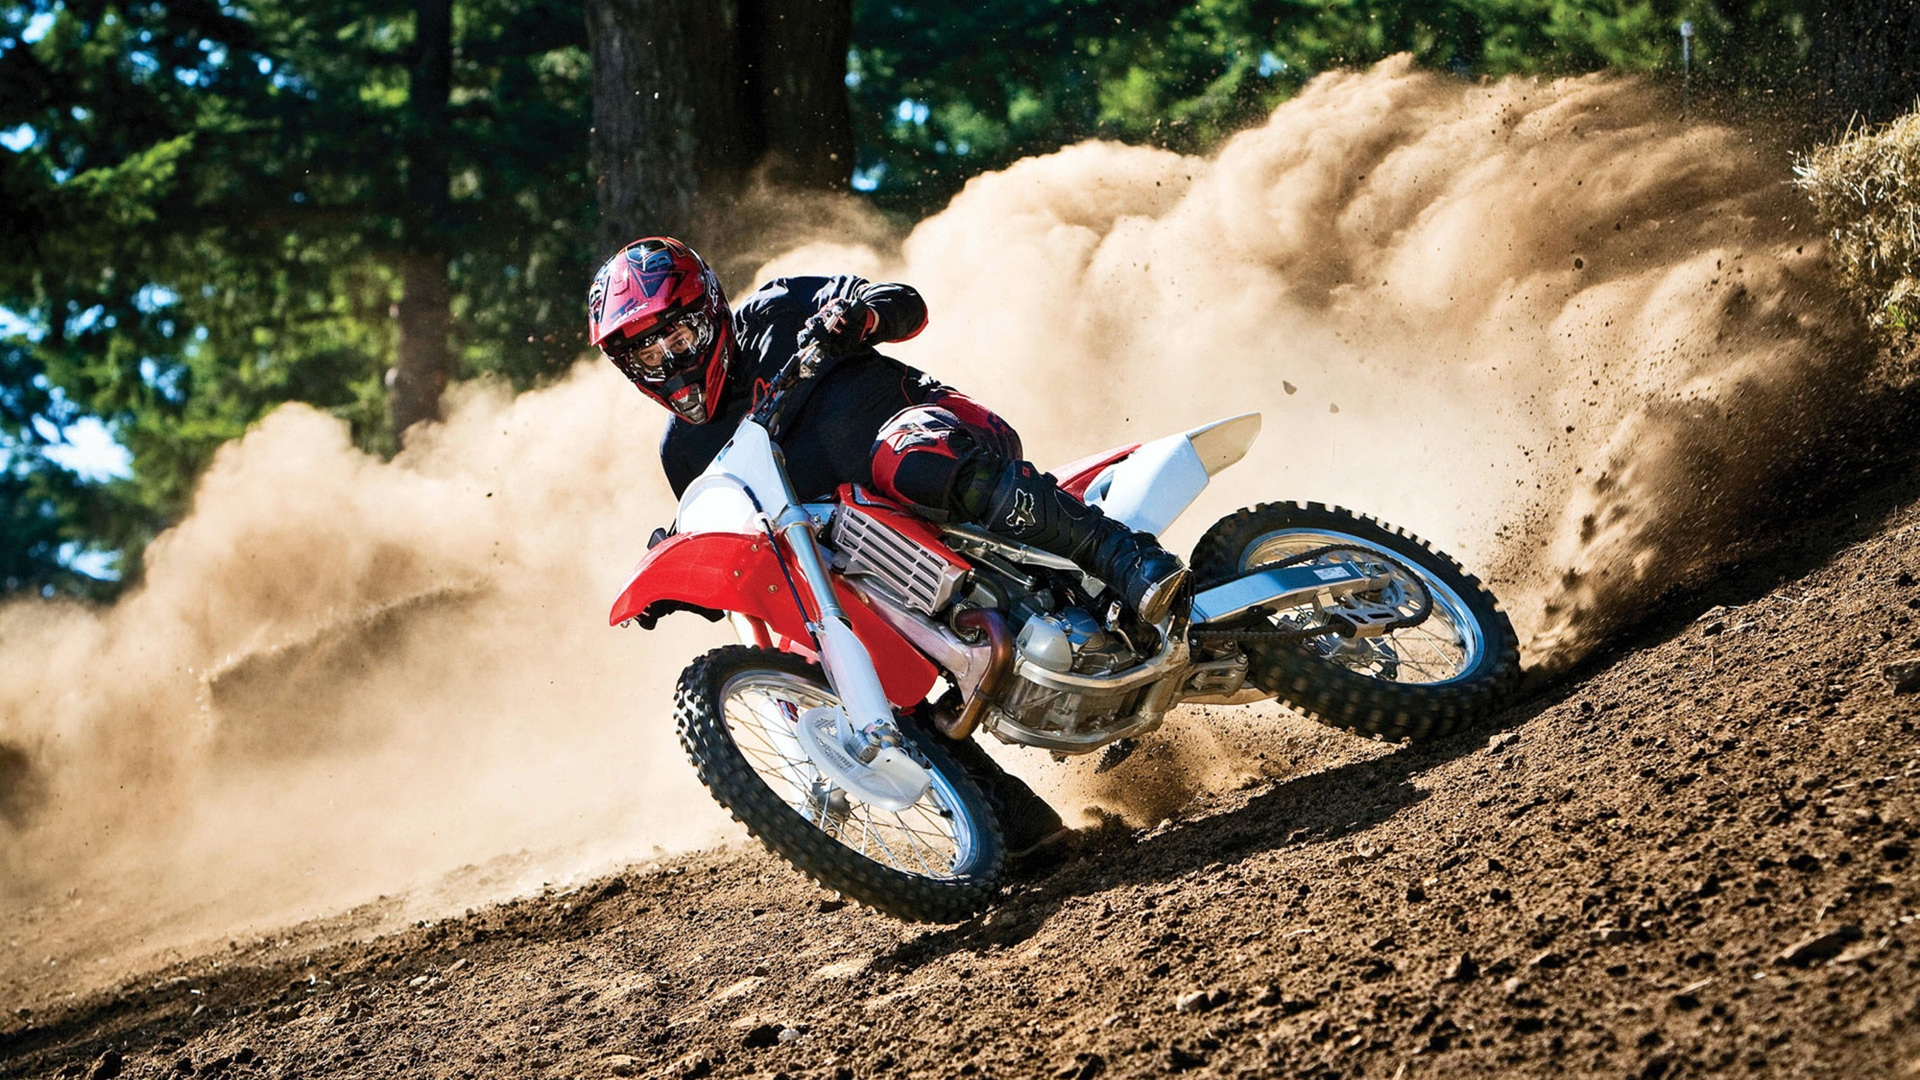 Moto Race in Forest for 1920 x 1080 HDTV 1080p resolution